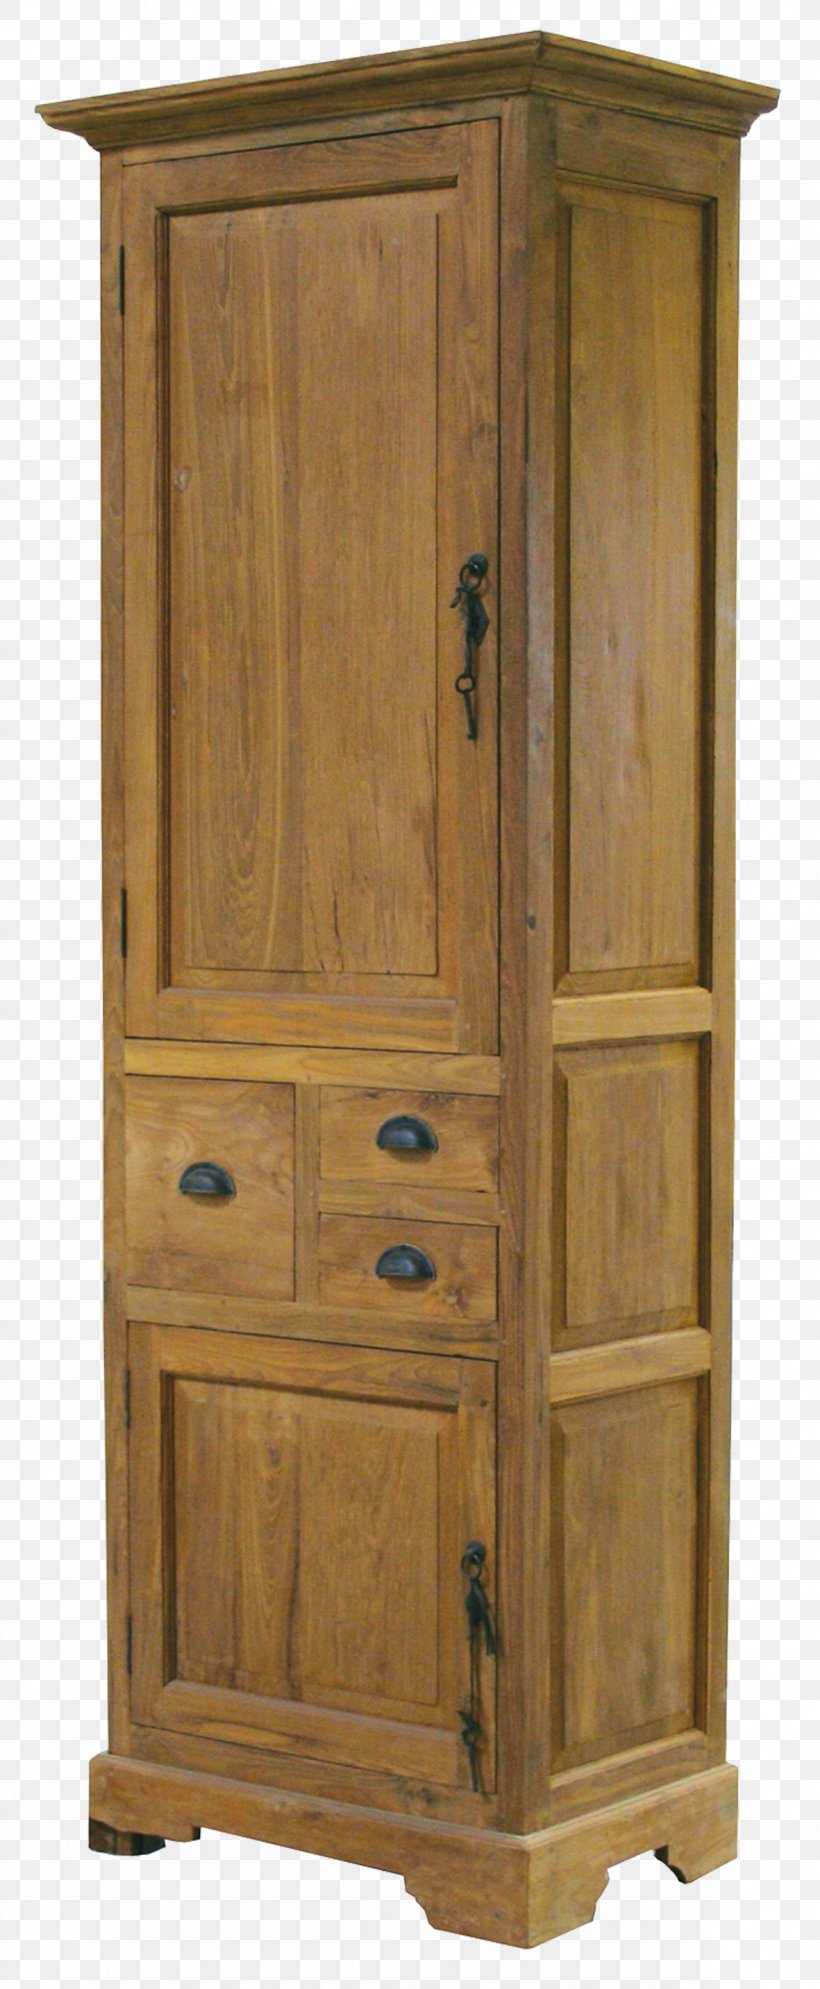 Armoires & Wardrobes Bedside Tables Furniture Drawer Wood, PNG, 1181x2866px, Armoires Wardrobes, Antique, Bedside Tables, Beslistnl, Cabinetry Download Free